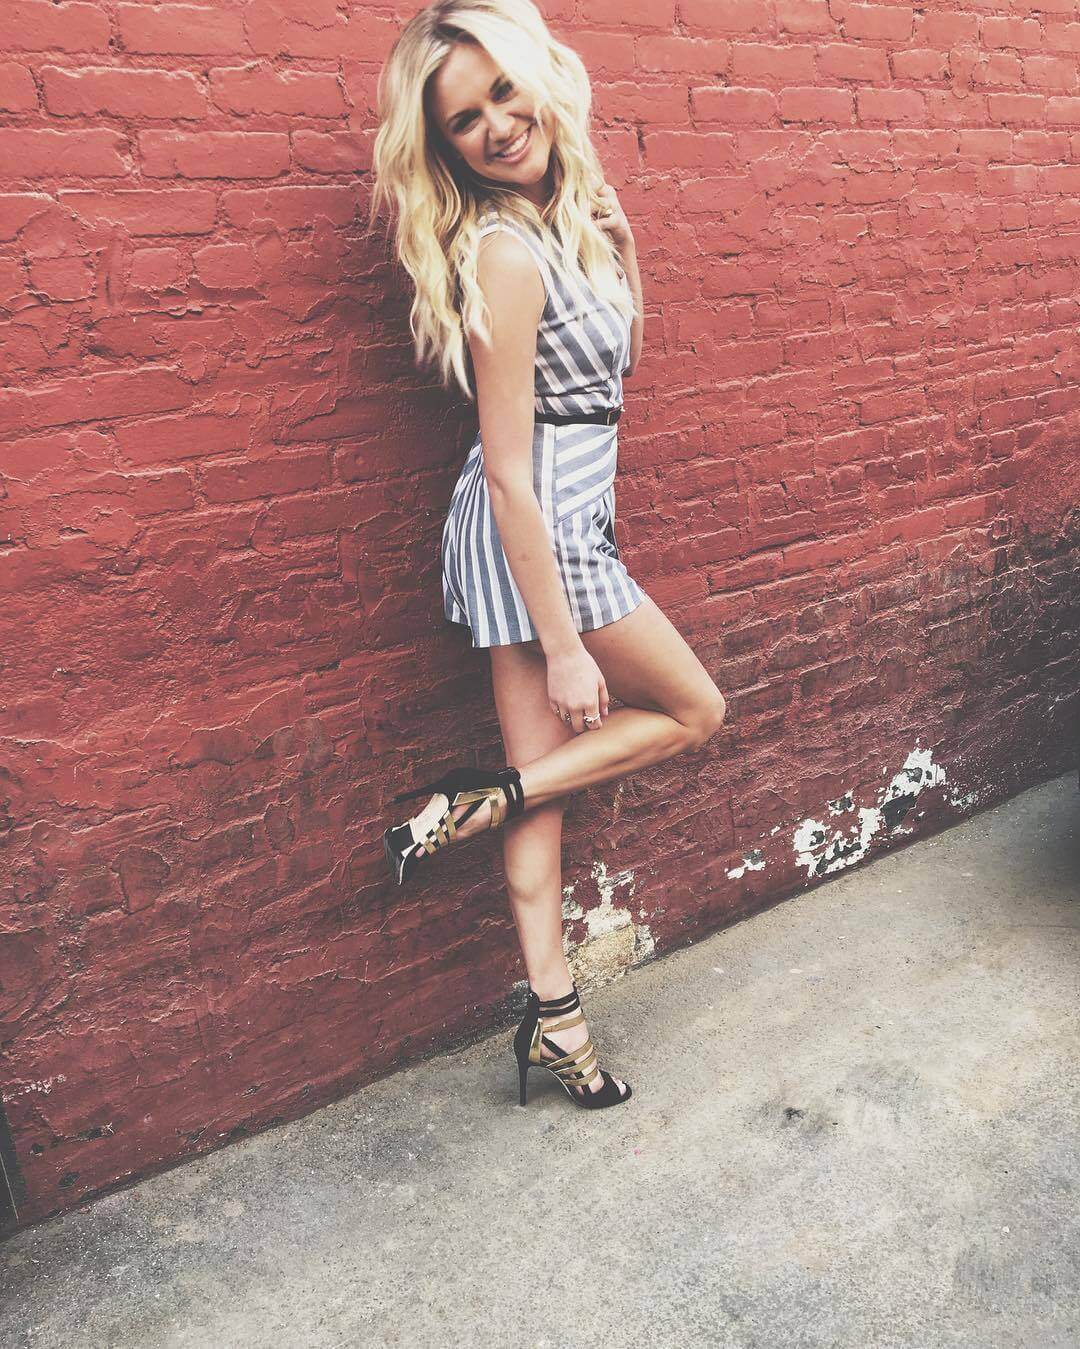 49 Sexy Kelsea Ballerini Feet Pictures Are Heaven On Earth | Best Of Comic Books